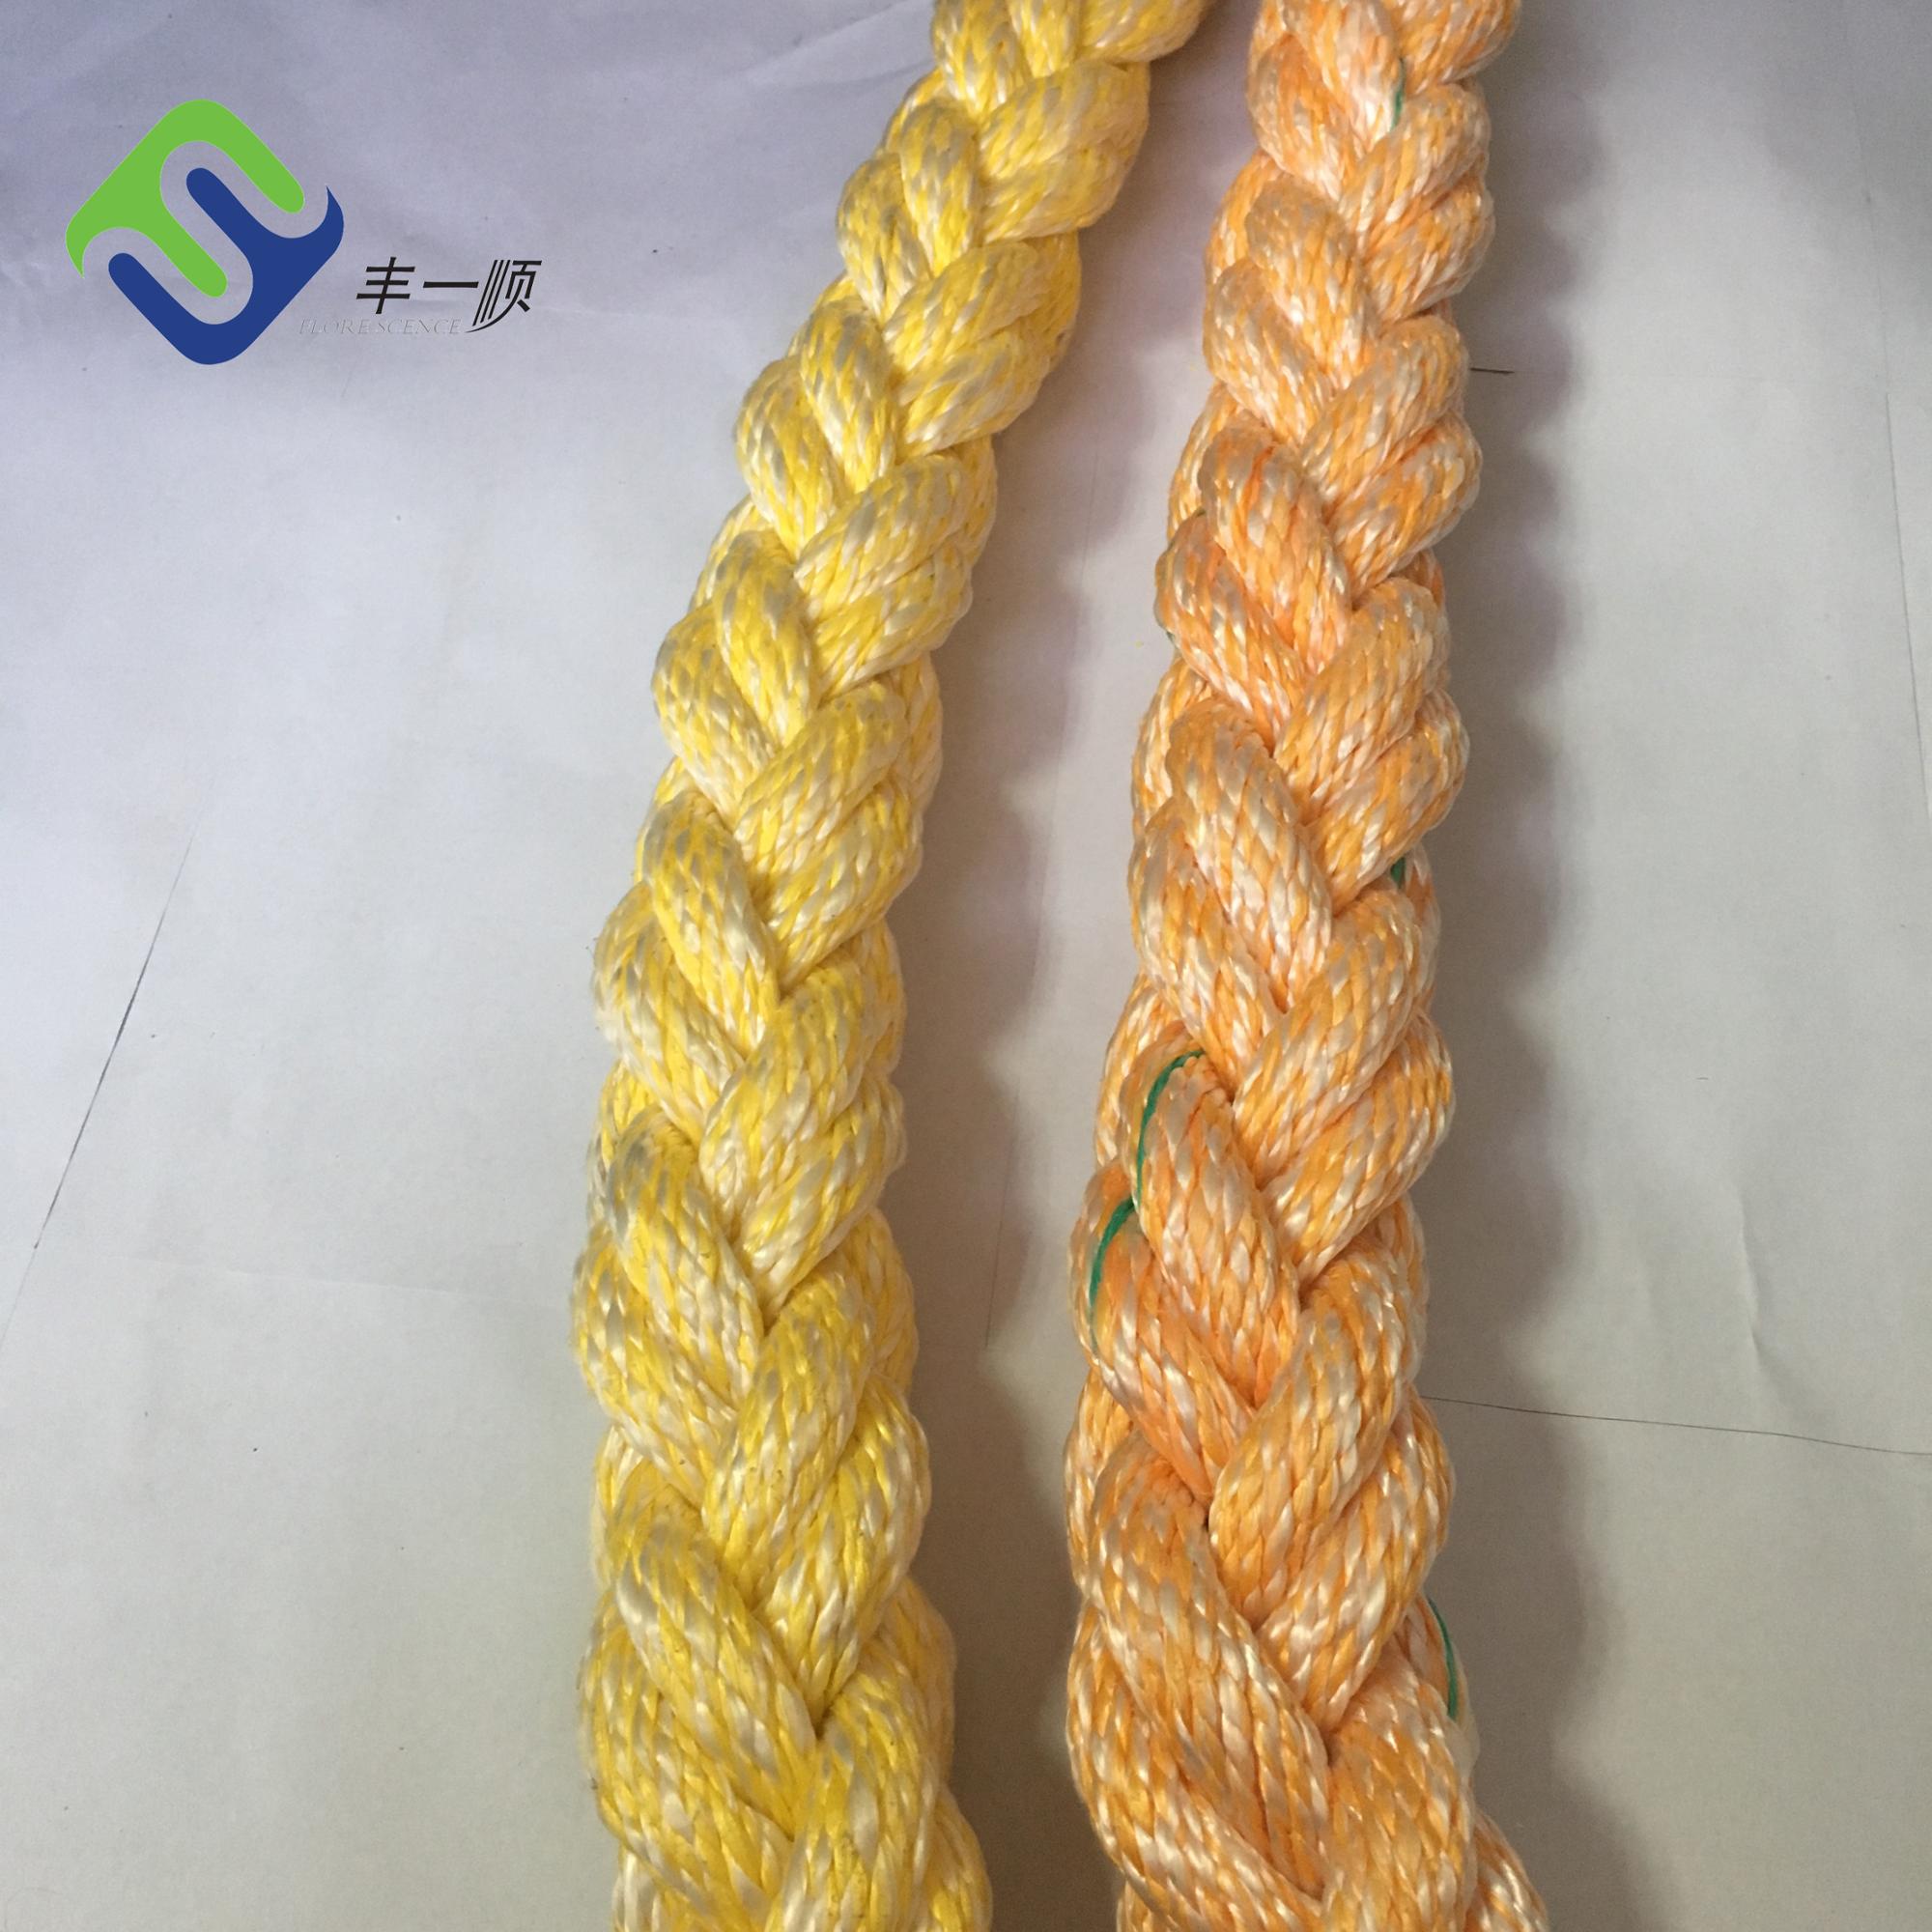 OEM/ODM China 2mm Uhmwpe Hollow Braided Rope - Yellow Marine mooring 8 strand PP and Polyester mixed rope for sale  – Florescence